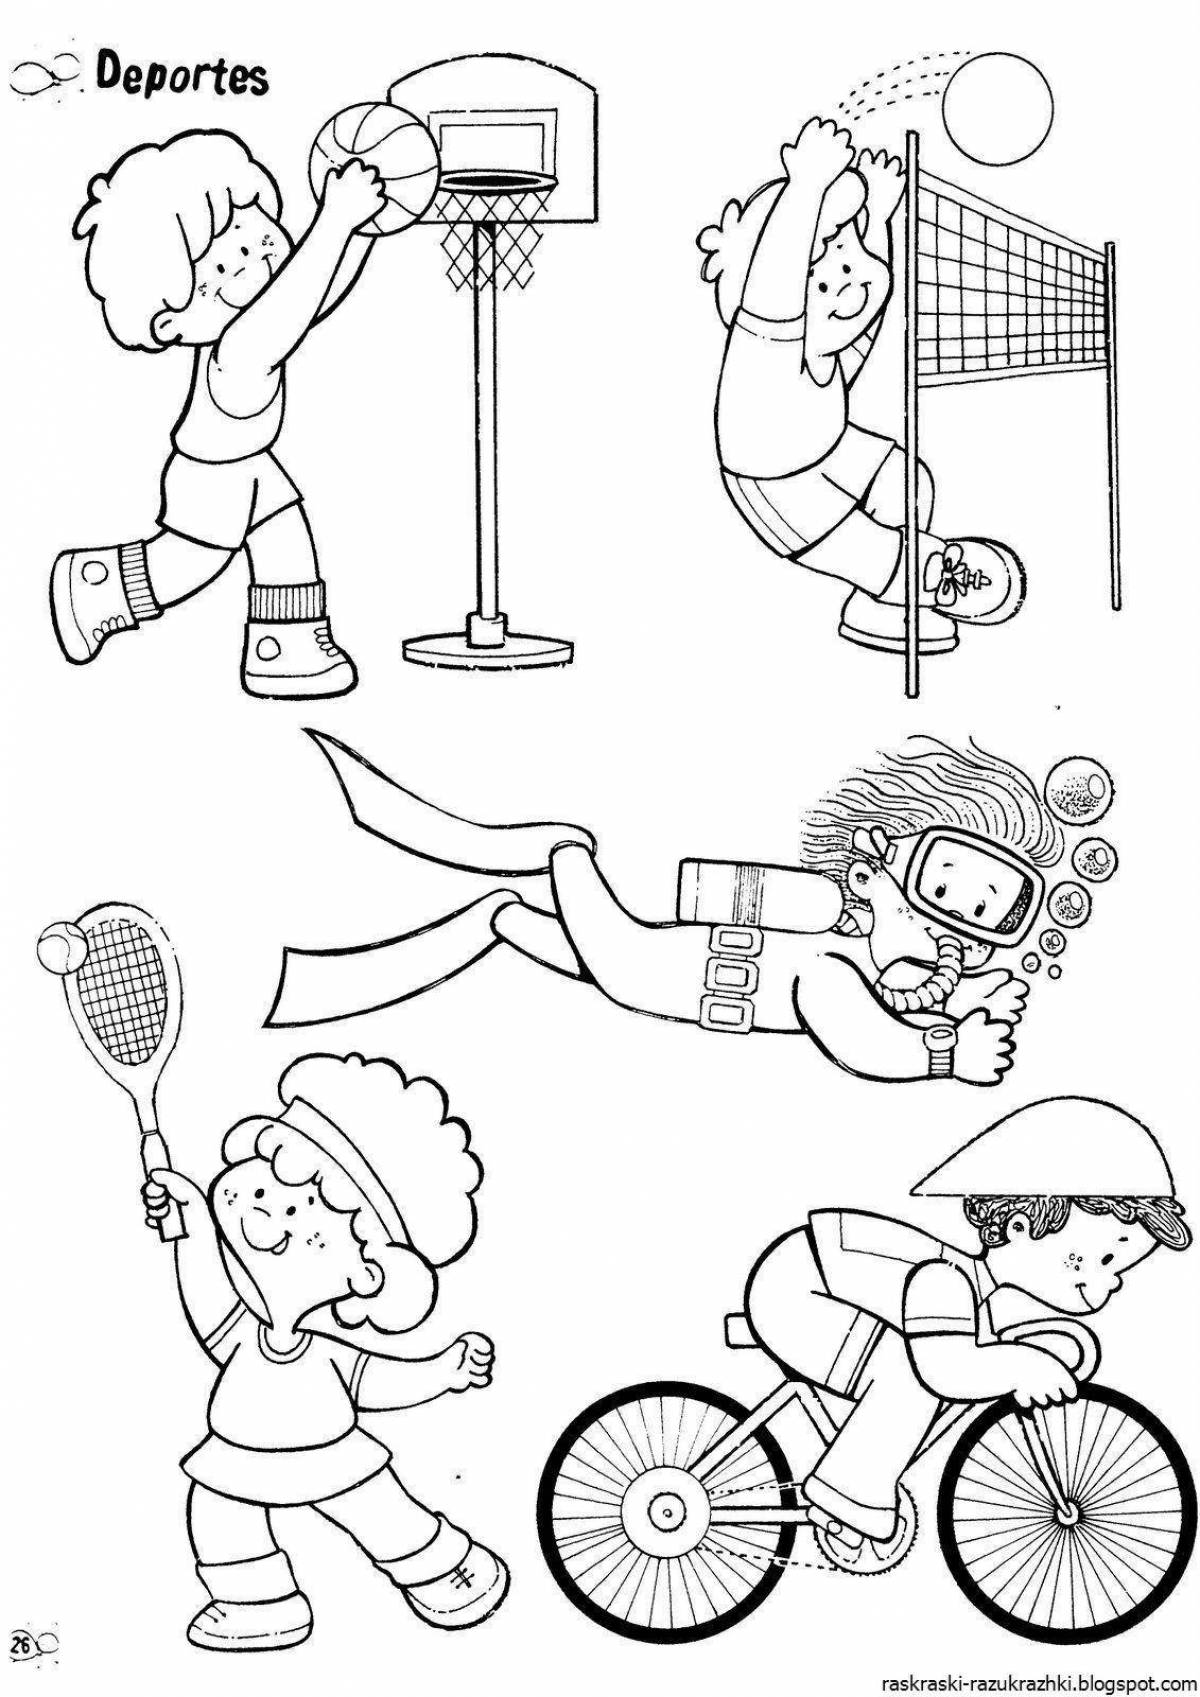 Fabulous sports coloring pages for kids 5-6 years old